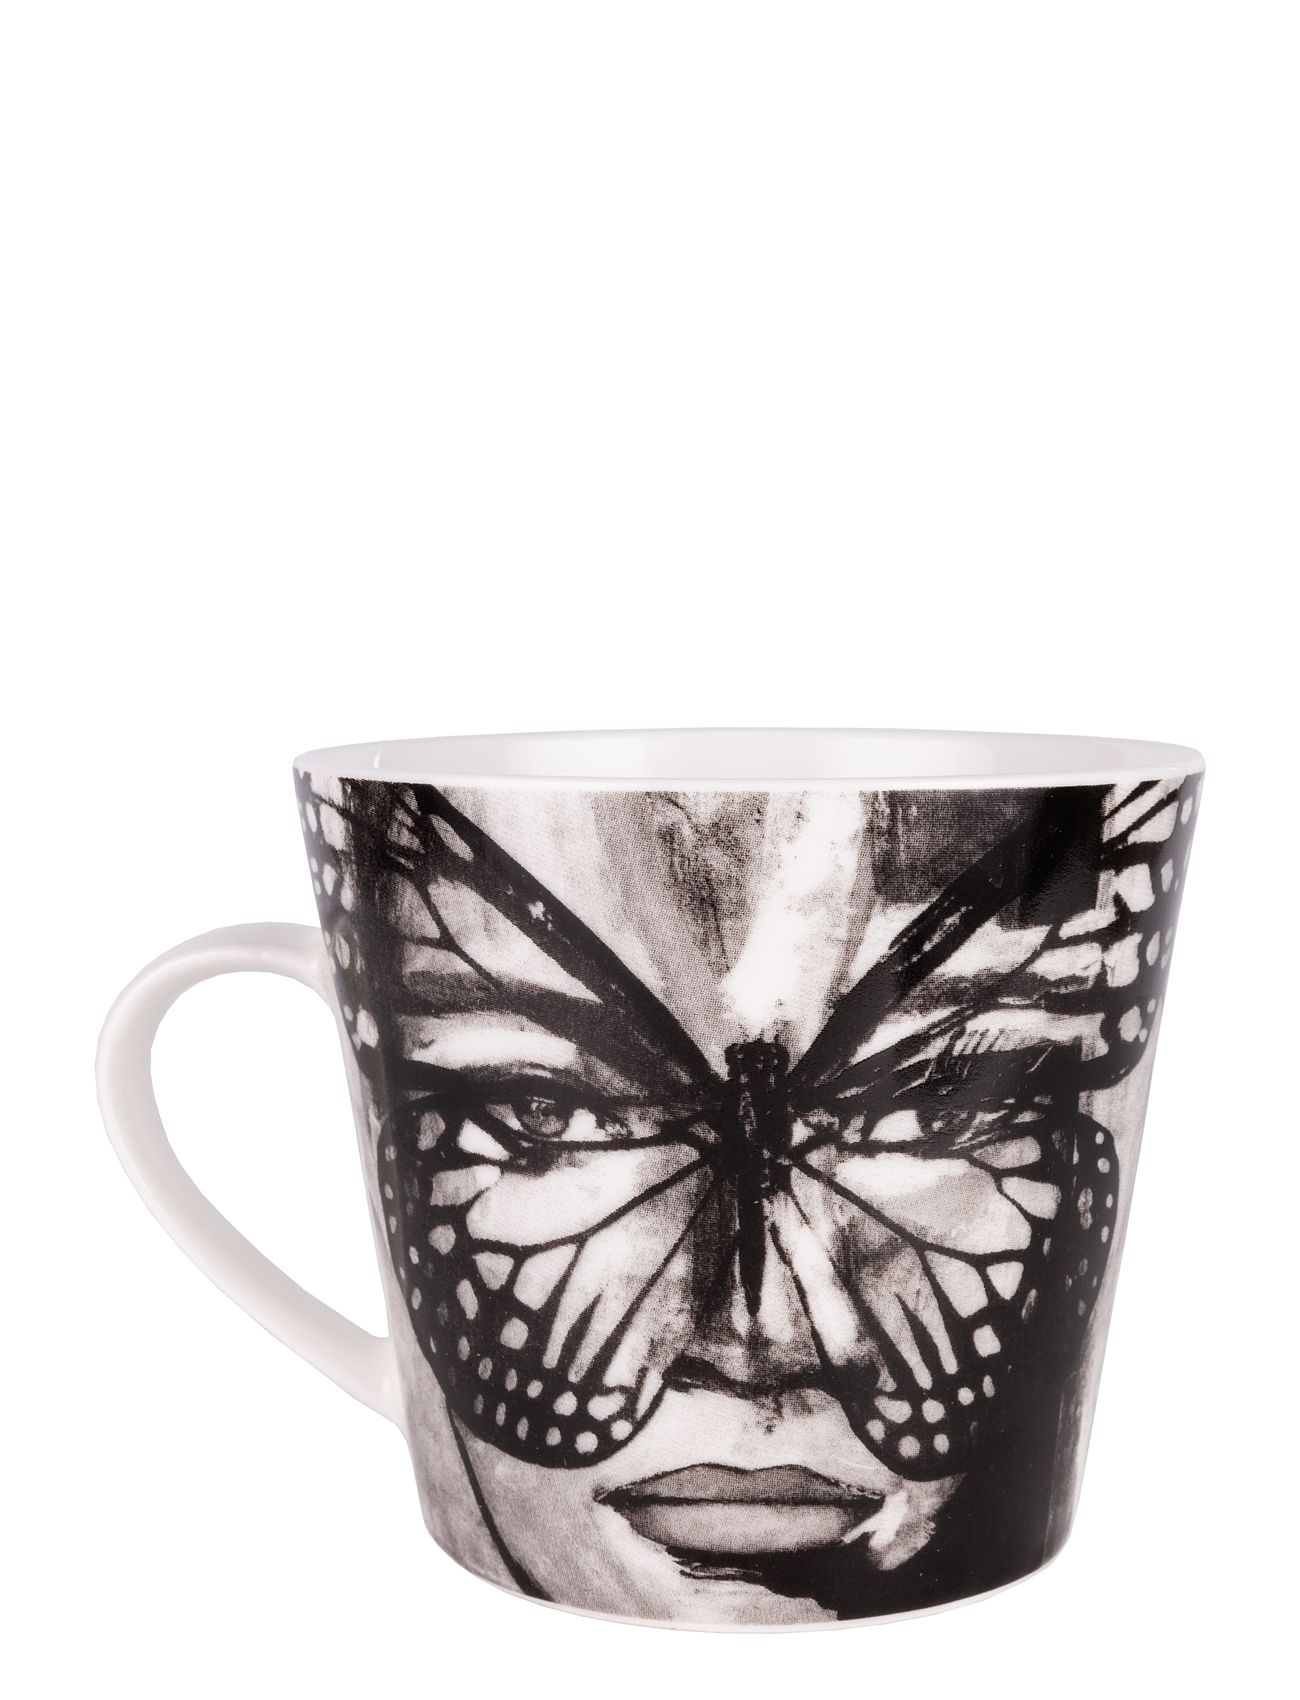 Golden Butterfly B&W With Ear Home Tableware Cups & Mugs Coffee Cups Black Carolina Gynning